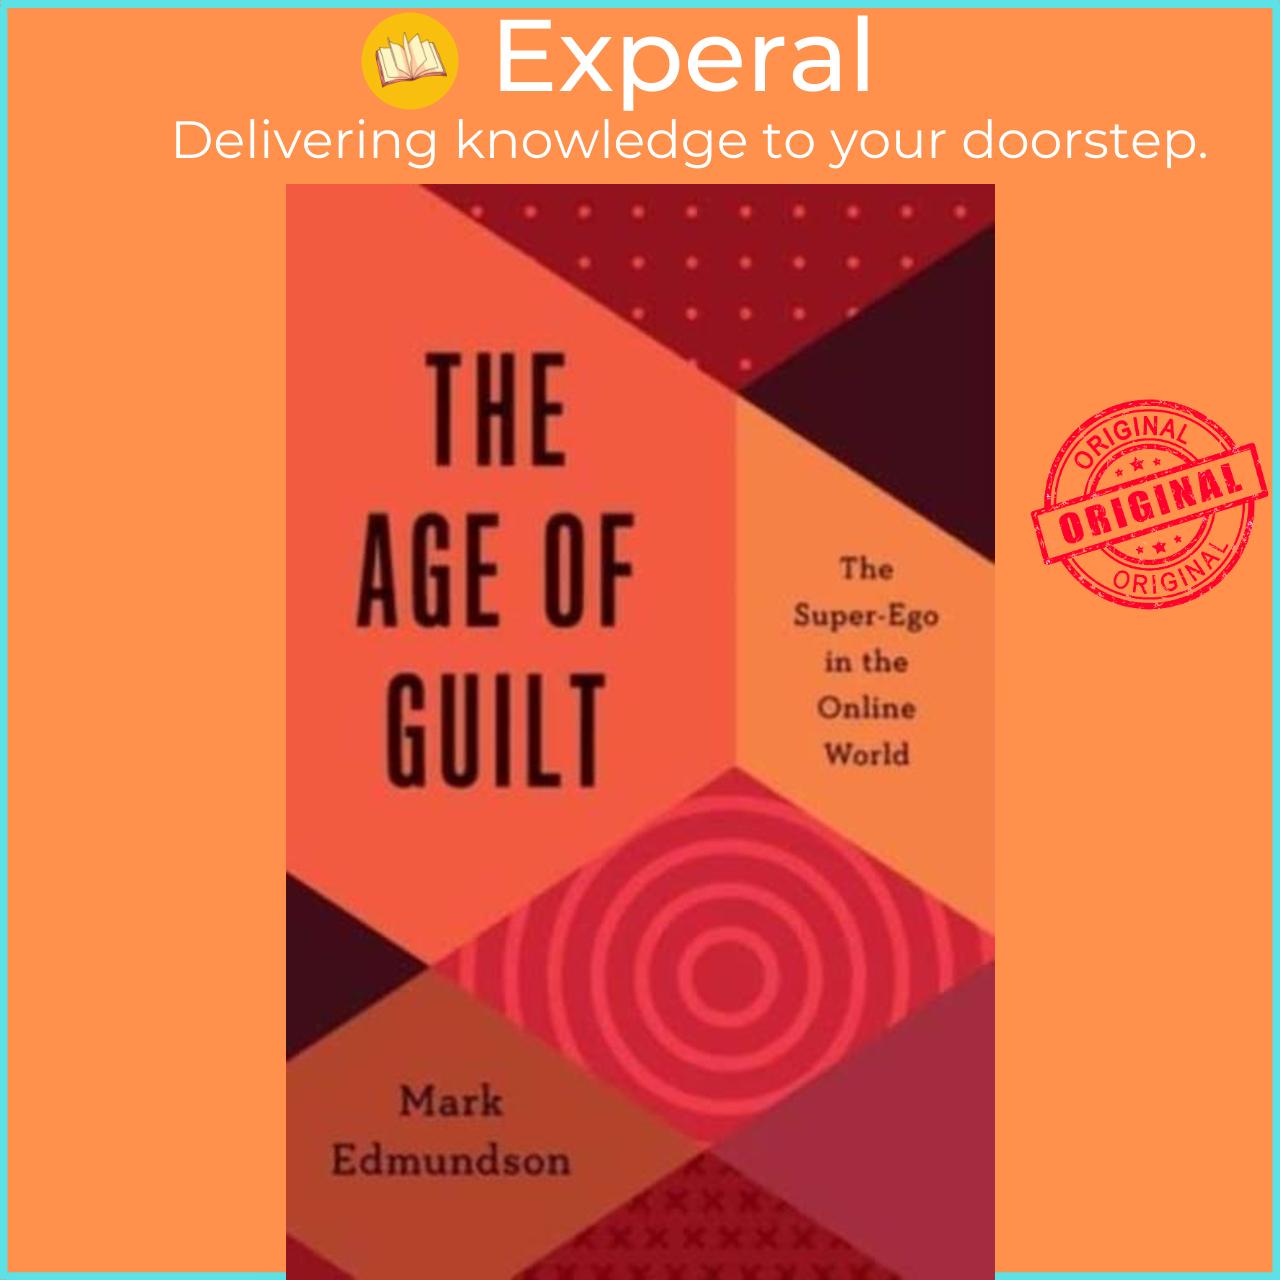 Sách - The Age of Guilt - The Super-Ego in the Online World by Mark Edmundson (UK edition, hardcover)